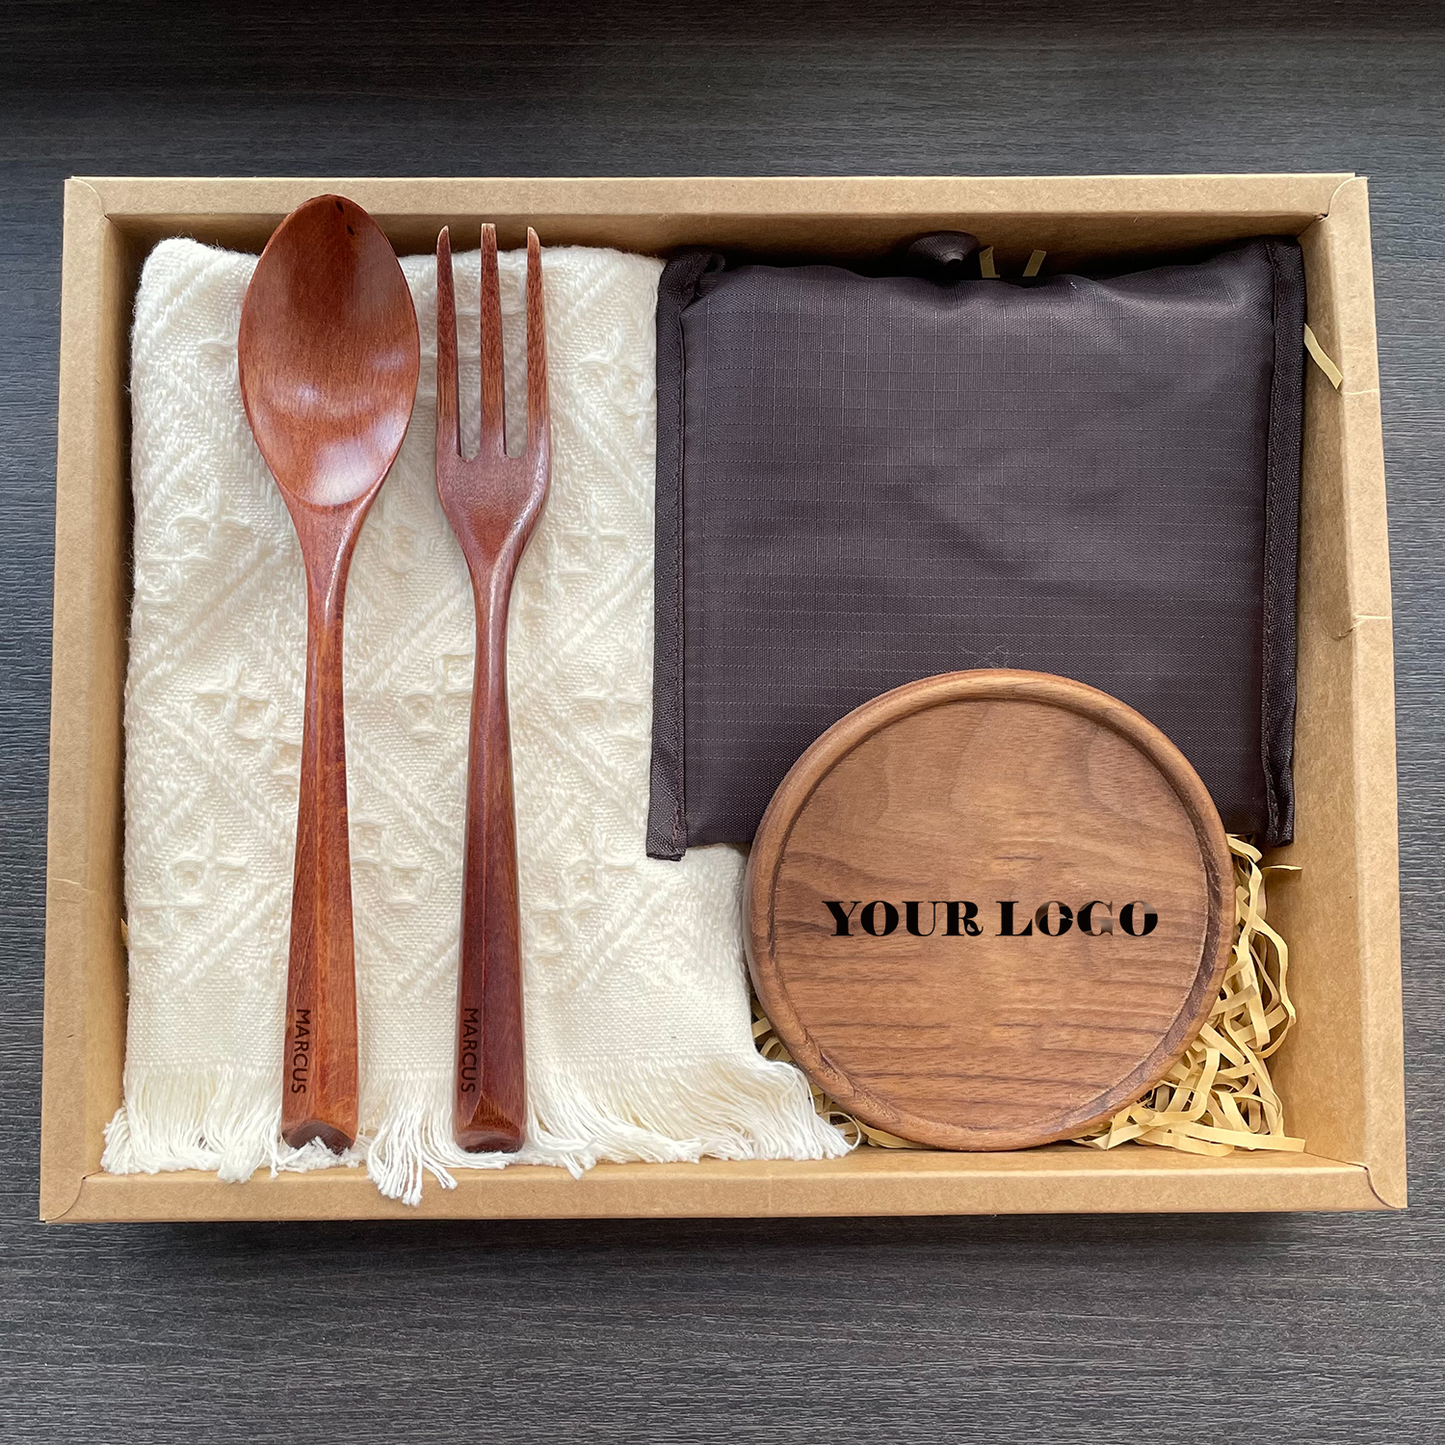 Wooden Coaster & Cutlery | Recycle Bag Gift Set - Walnut Wood